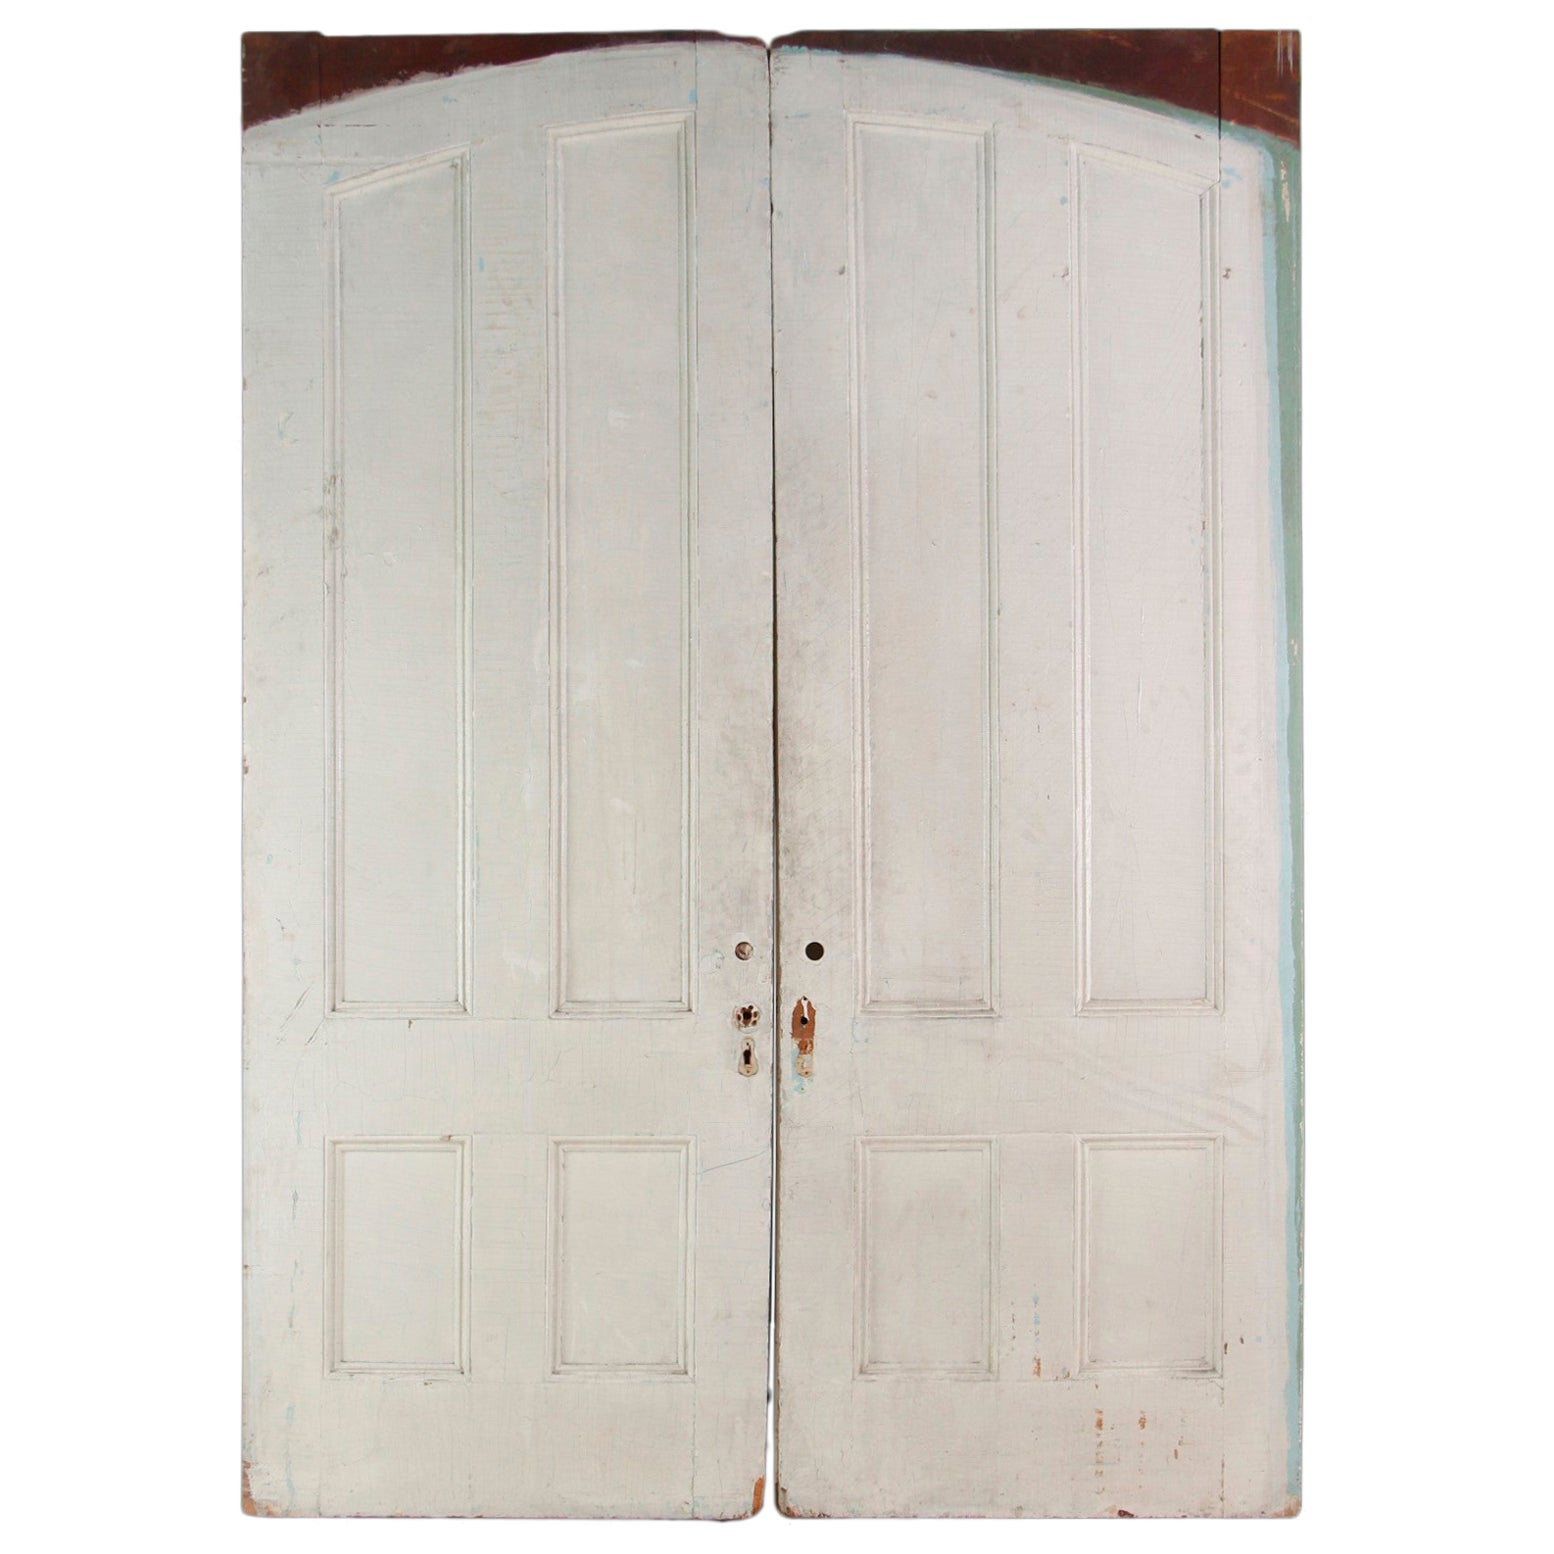 Set of Antique 4 Pane Wood Pocket Doors Painted White Vertical Panels For Sale